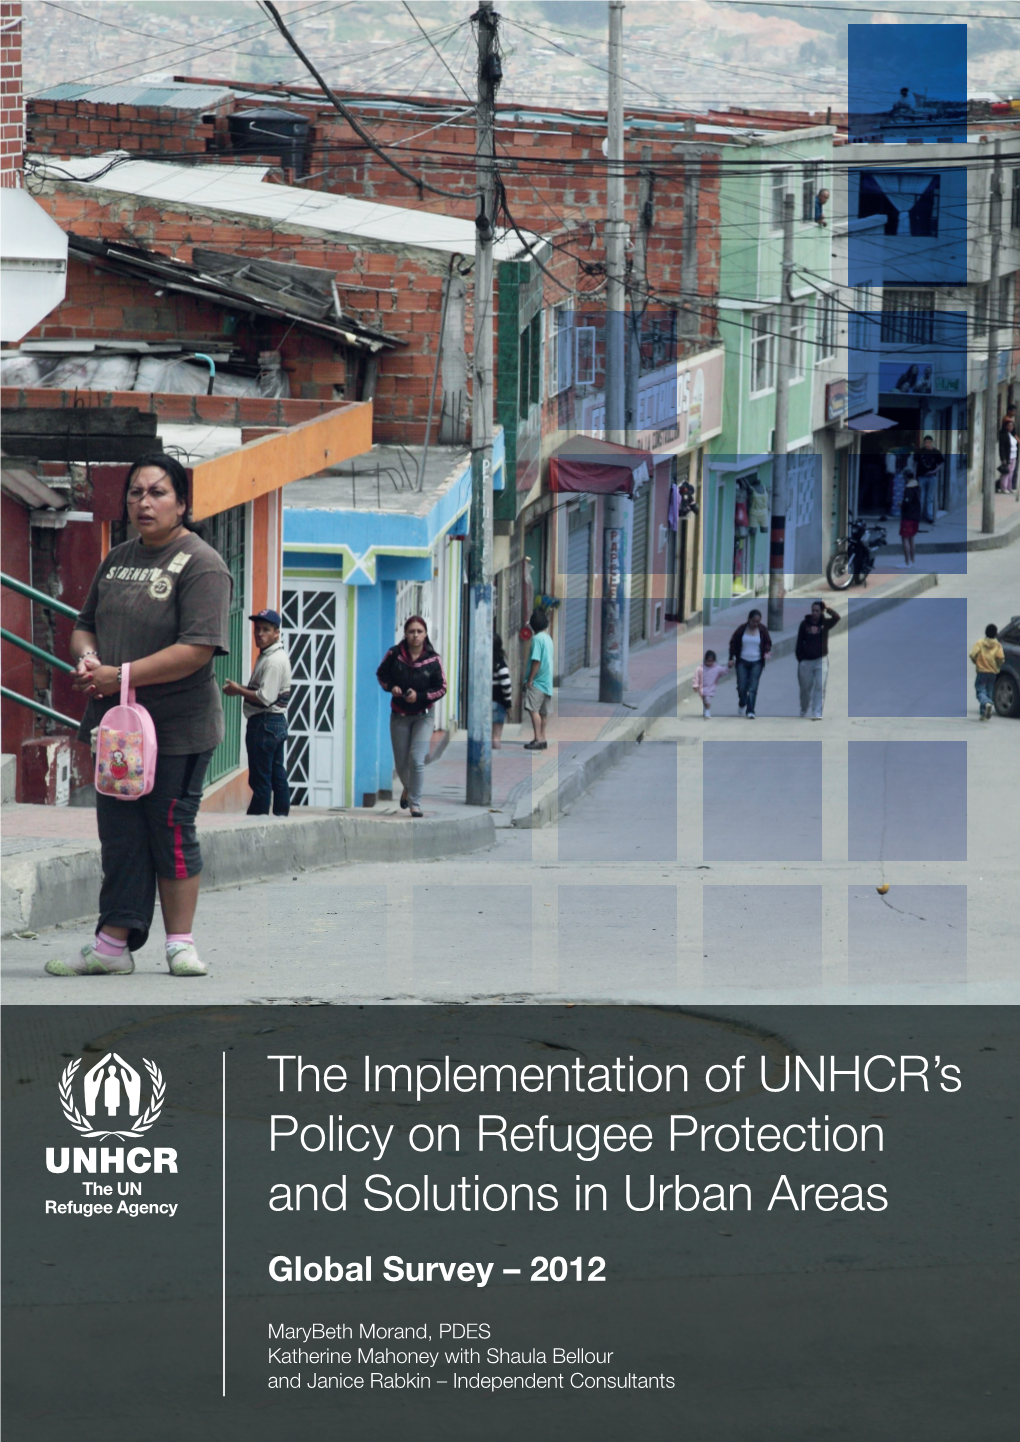 The Implementation of UNHCR's Policy on Refugee Protection And